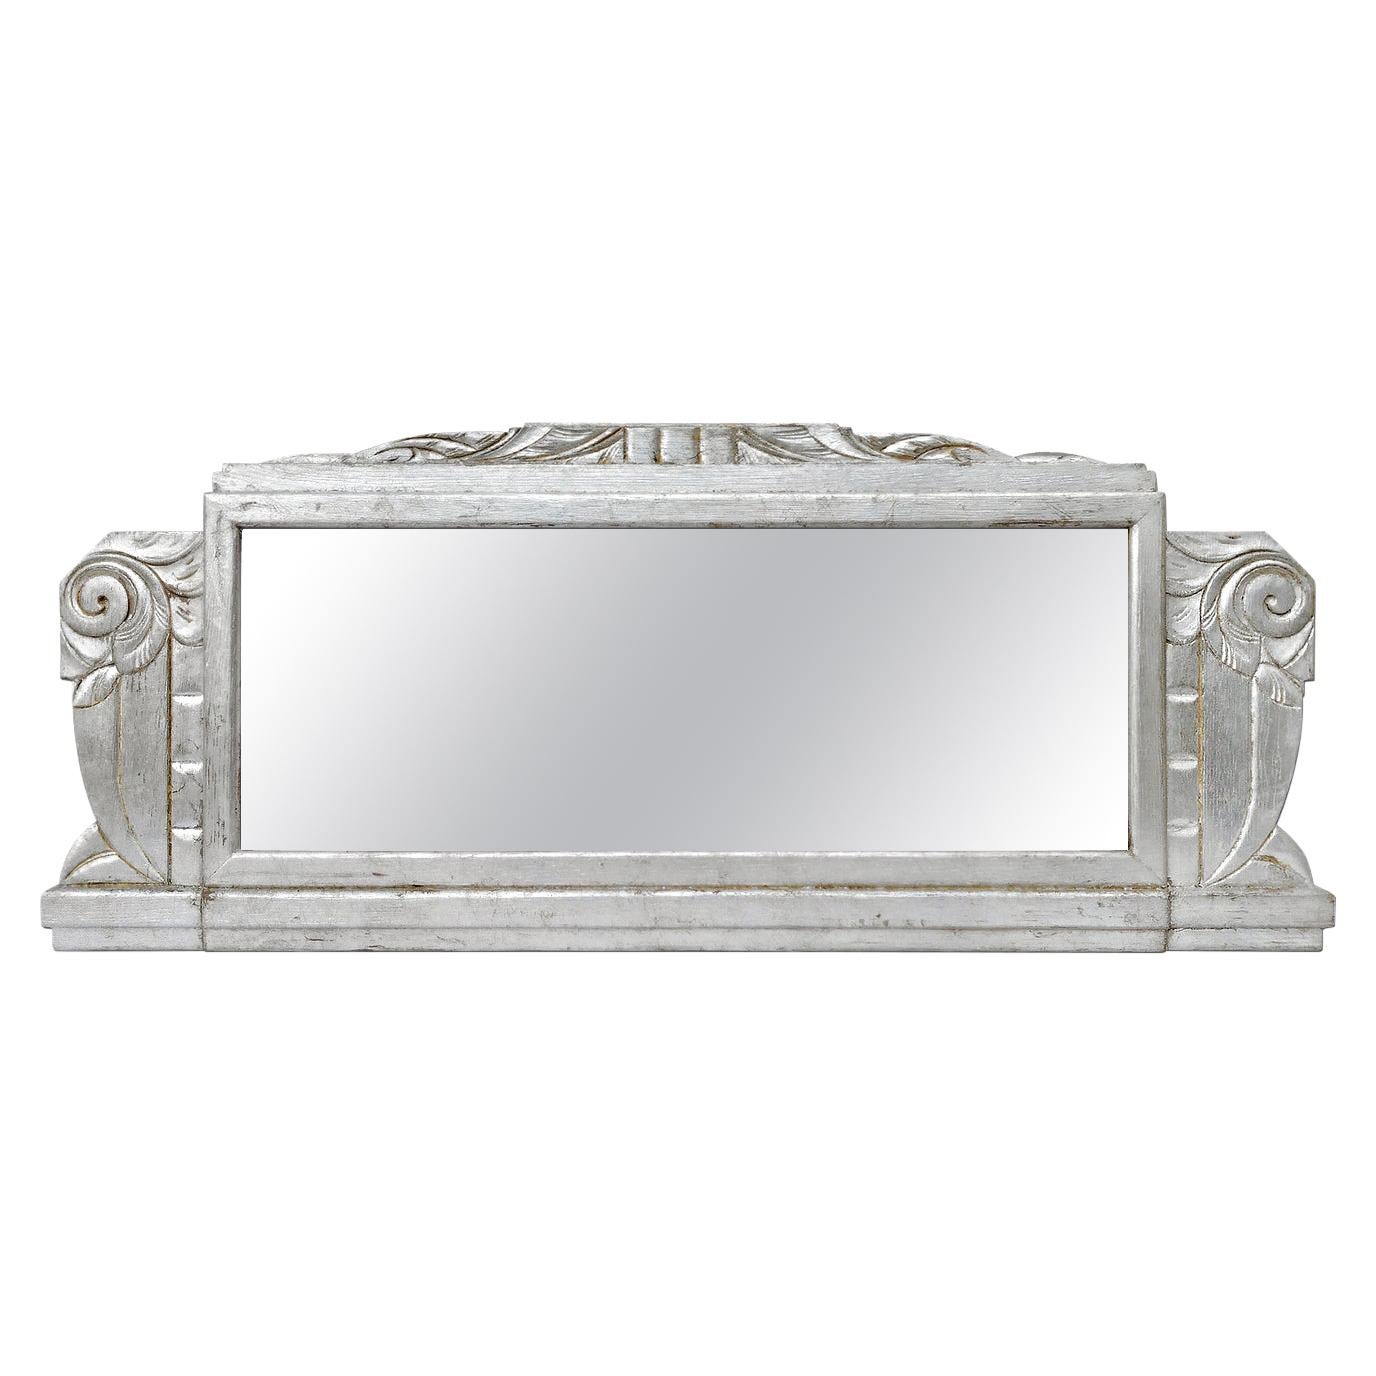 Large Antique French Mirror Silver Wood Art Deco Style, circa 1940 For Sale